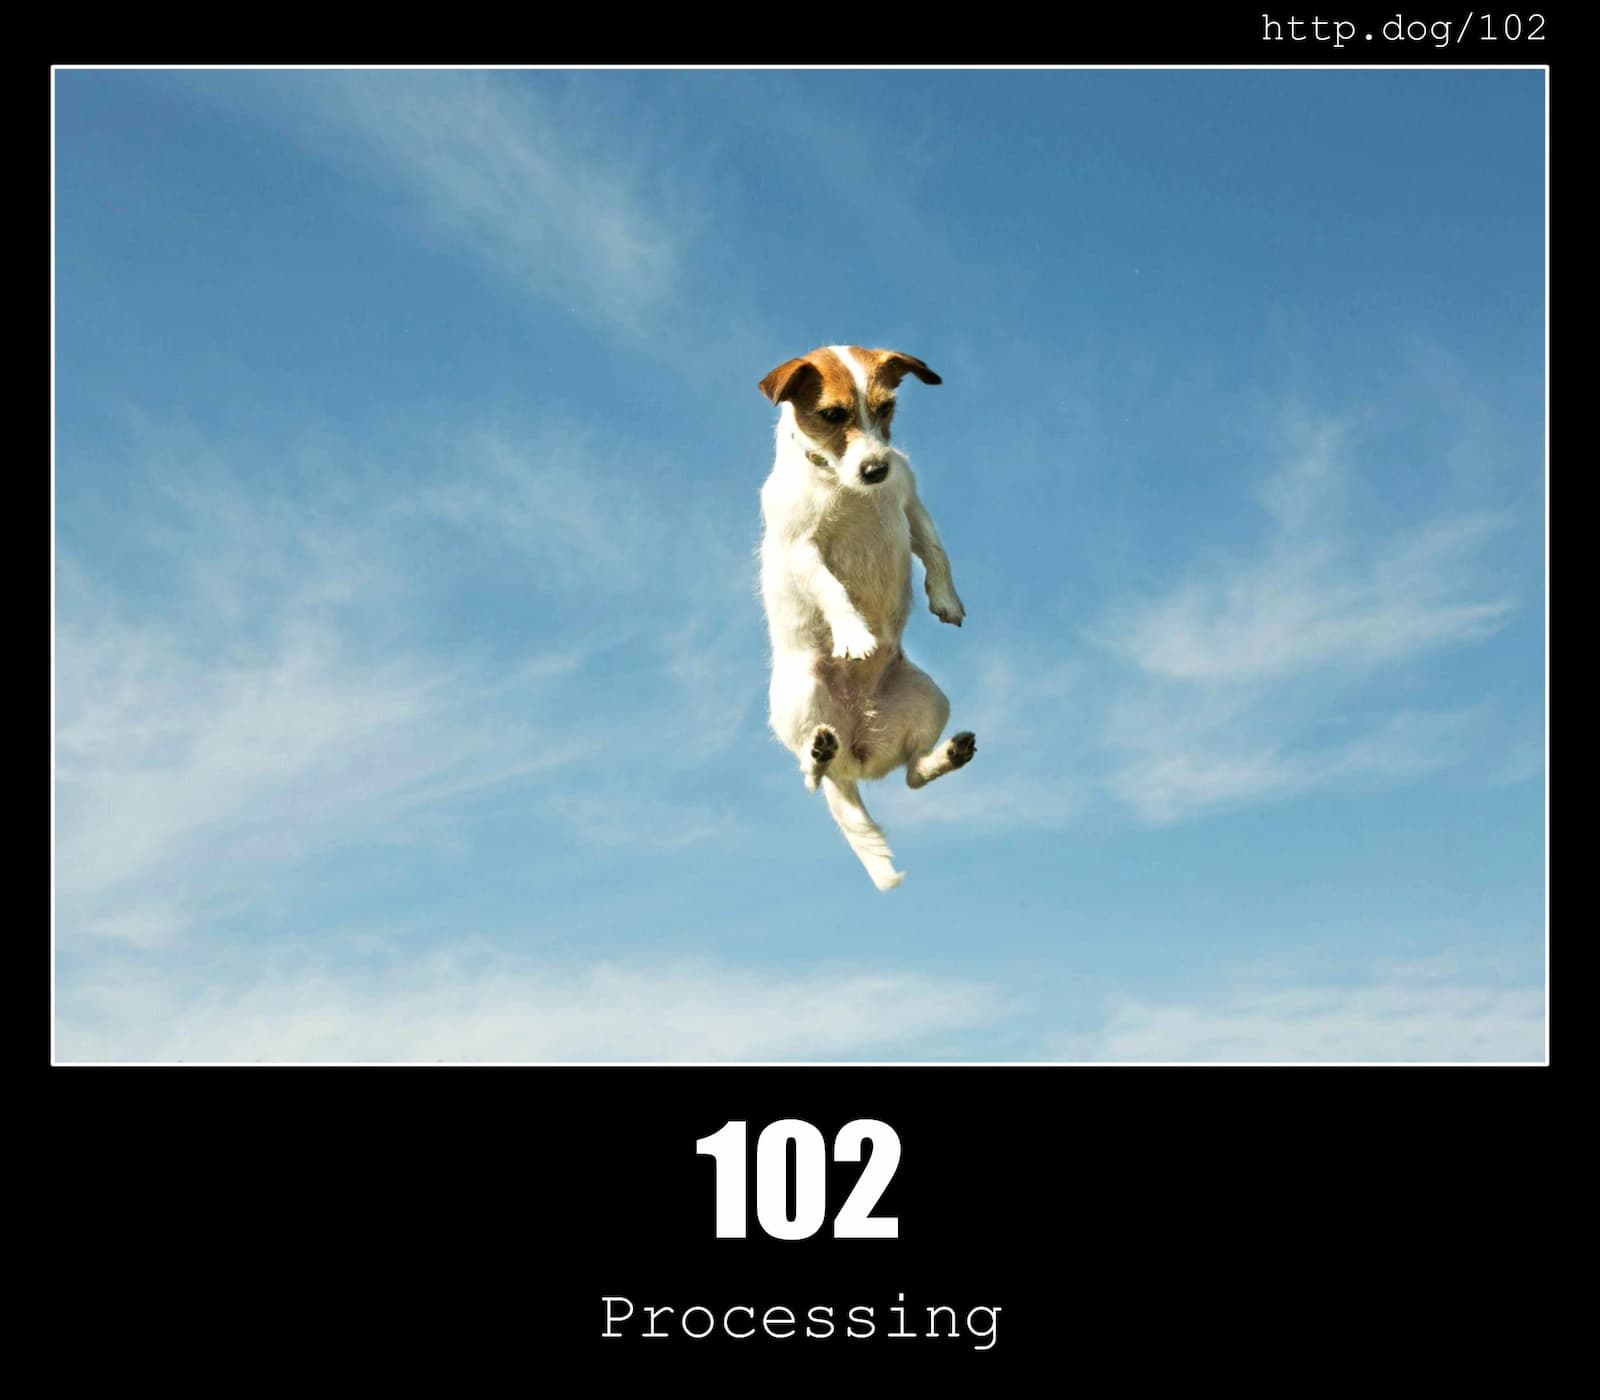 HTTP Status Code 102 Processing & Dogs